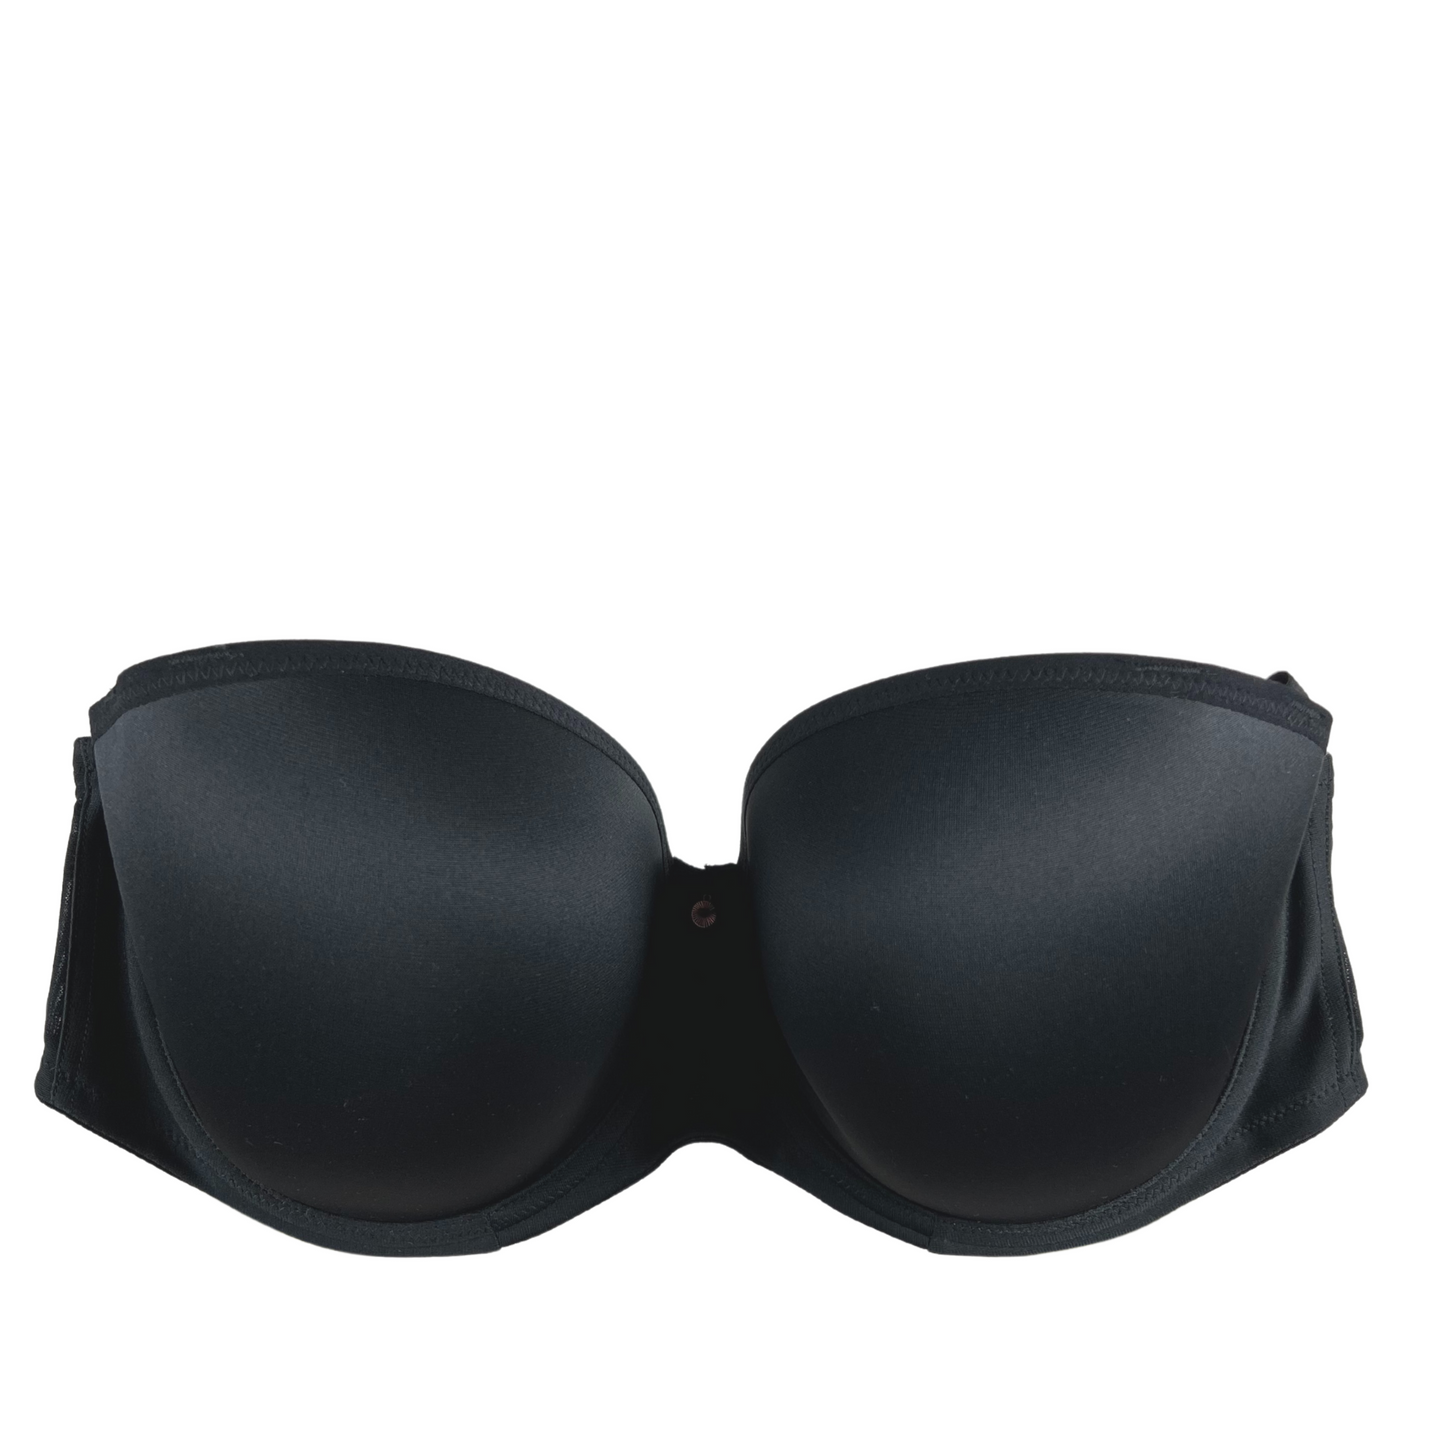 Elomi Smoothing Underwire Foam Moulded Strapless Bra, Black